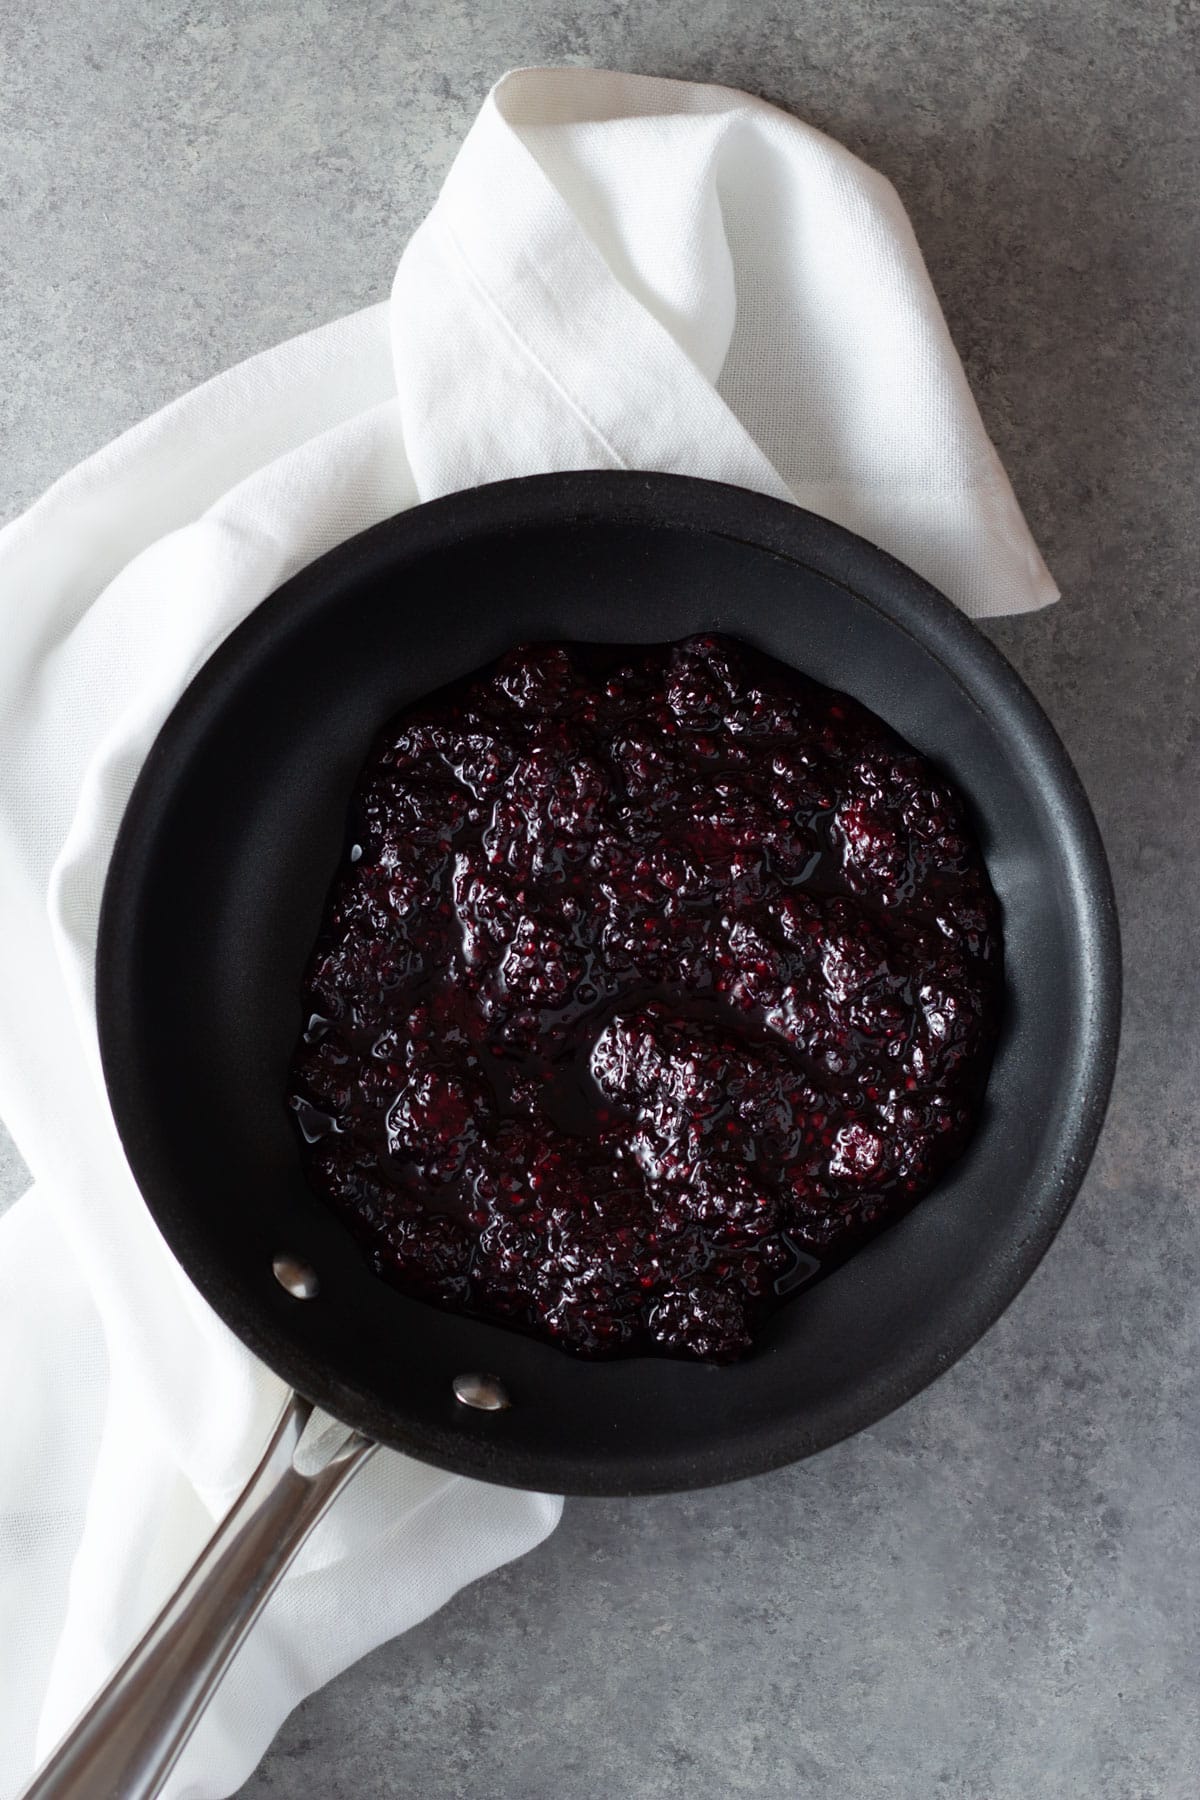 Overhead view of a pan with blackberry jam next to a dishtowel on a grey surface.